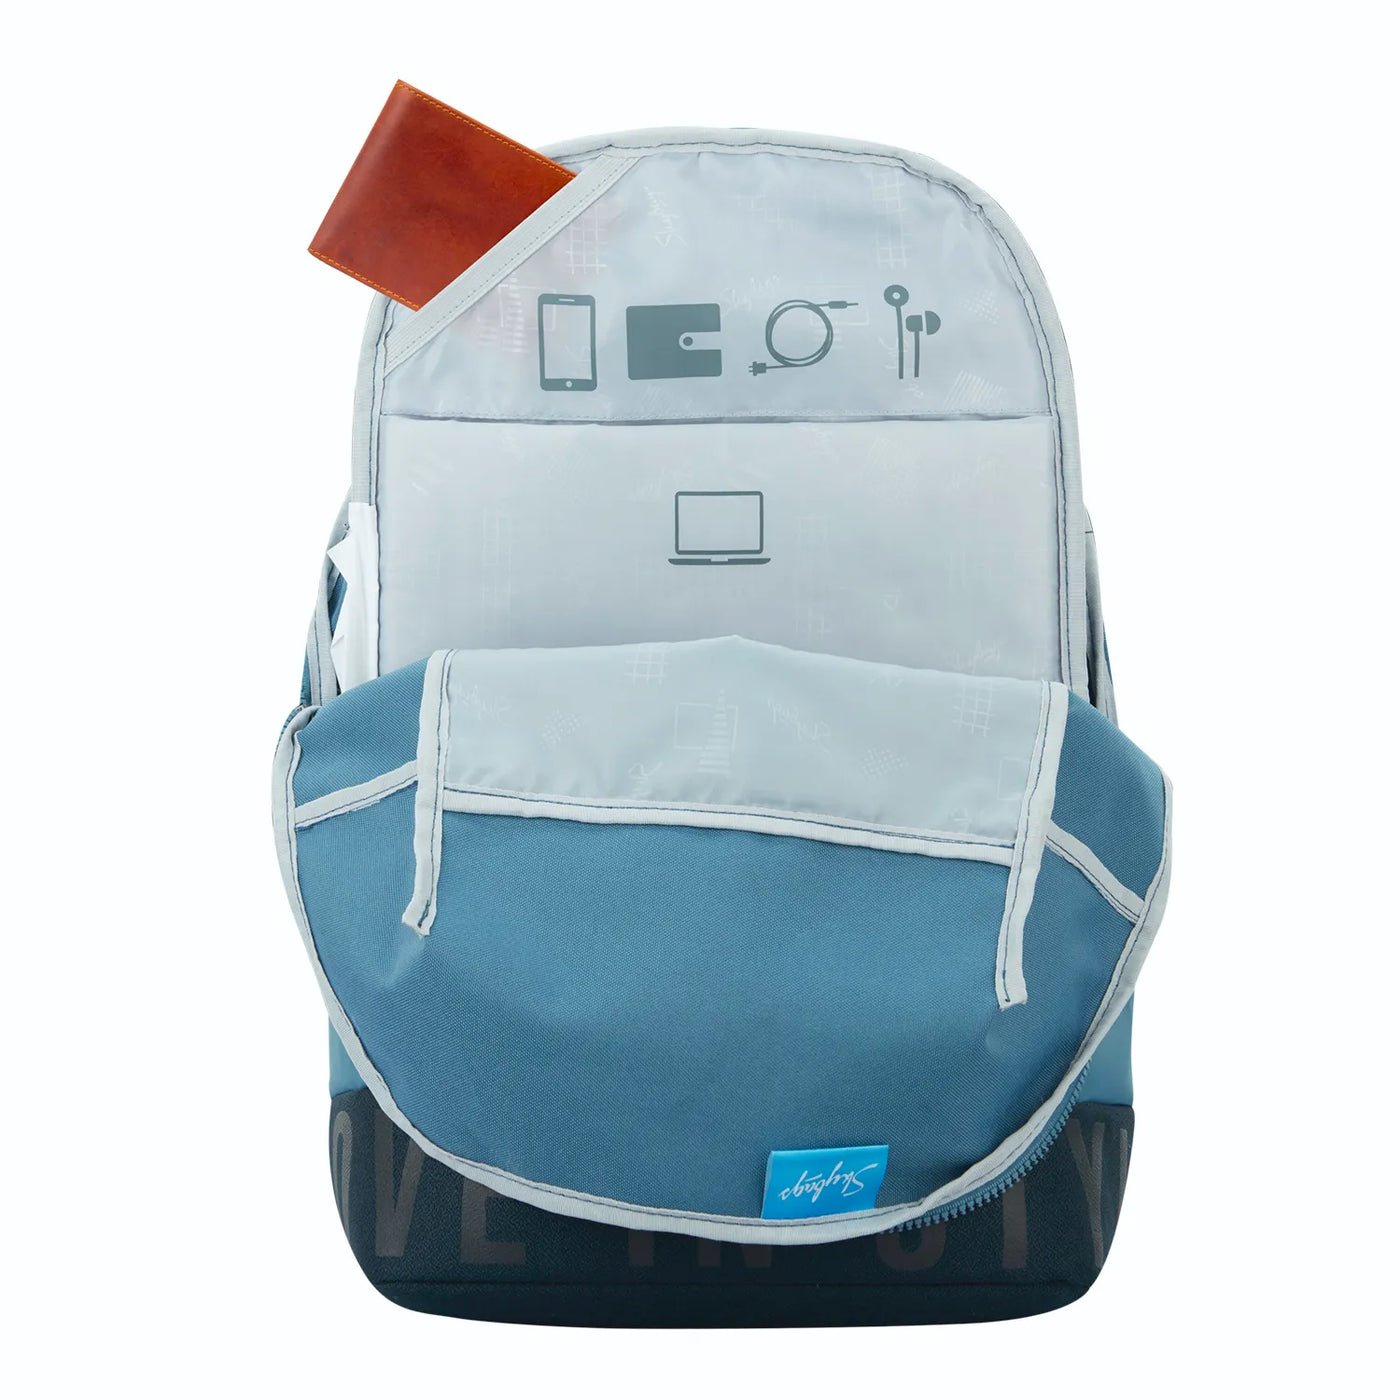 SKYBAGS BOHO "01 BACKPACK WITH RAIN COVER" LIGHT BLUE